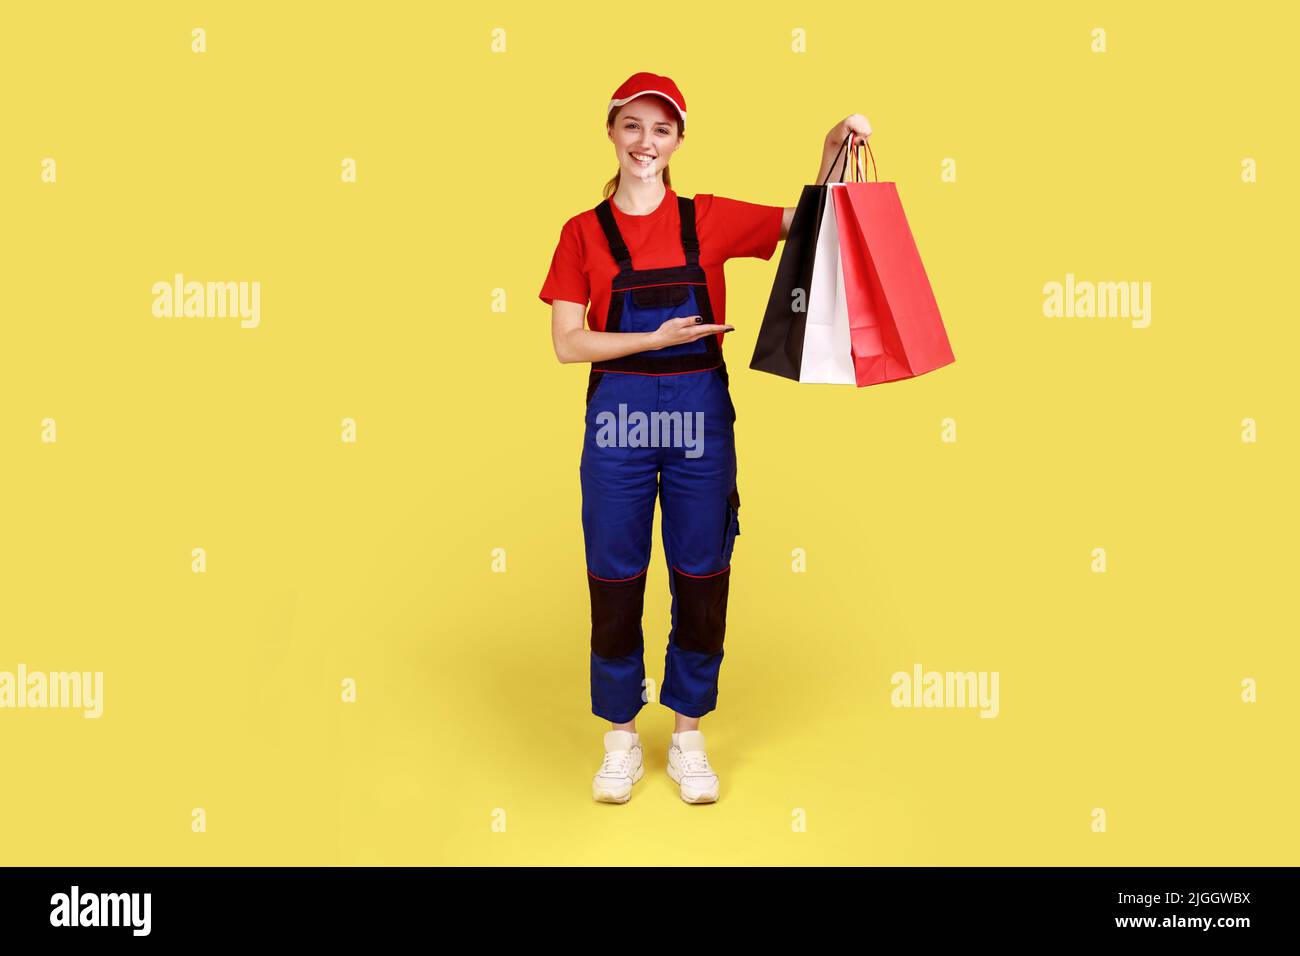 Beautiful optimistic courier woman standing with shopping bags in hands, showing presenting parcels, expressing happiness, wearing overalls and cap. Indoor studio shot isolated on yellow background. Stock Photo